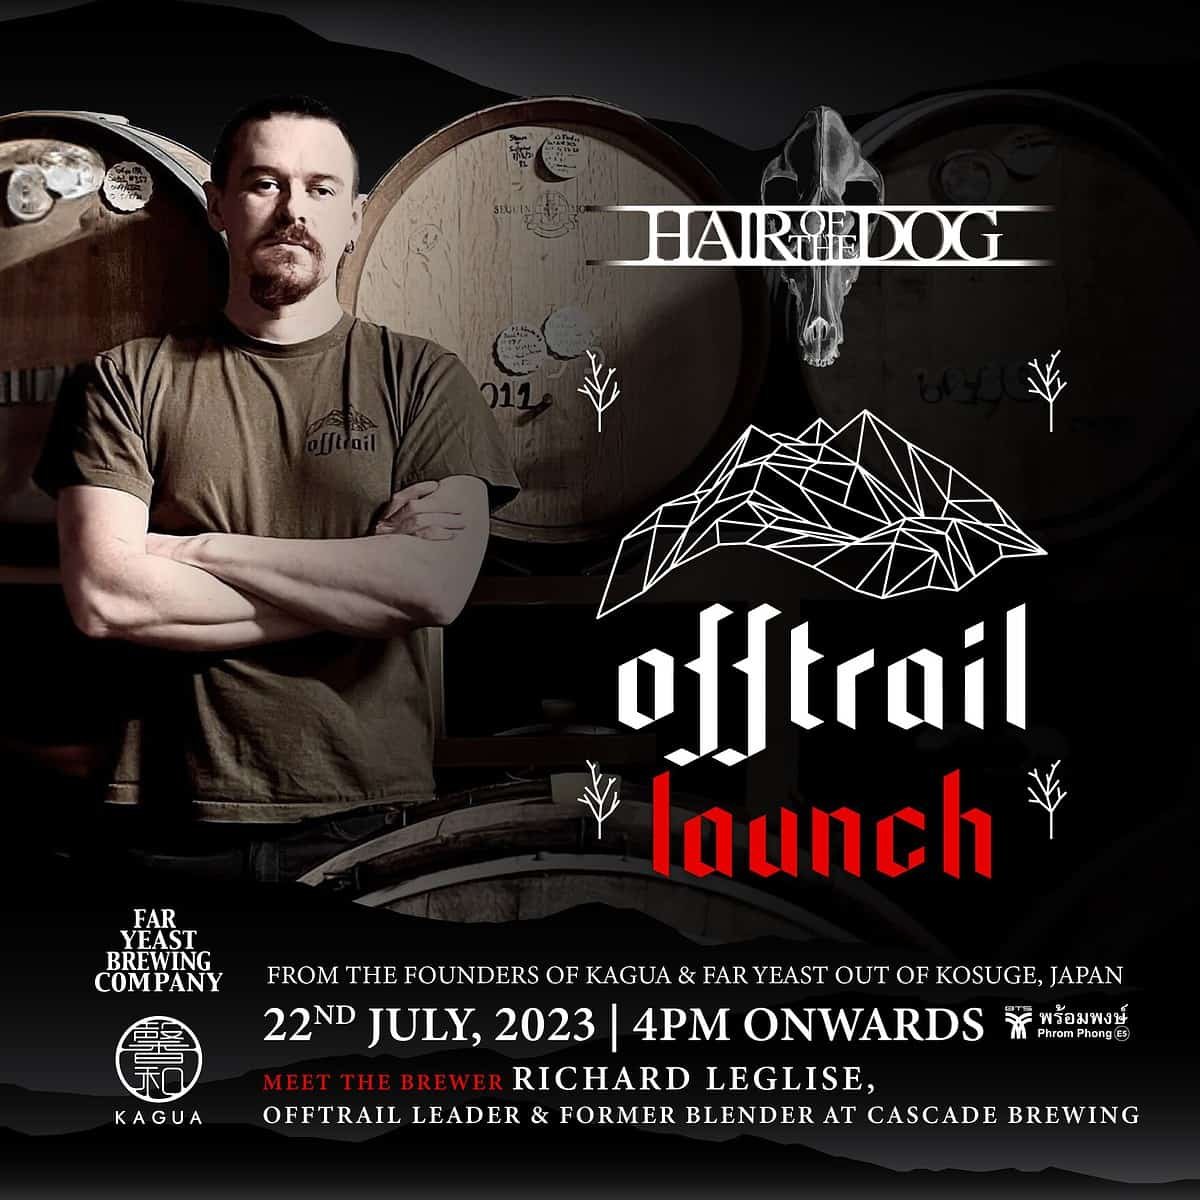 Off Trail craft beer by Far Yeast Brewing to Launch in Bangkok at Hair of the Dog in Bangkok Thailand